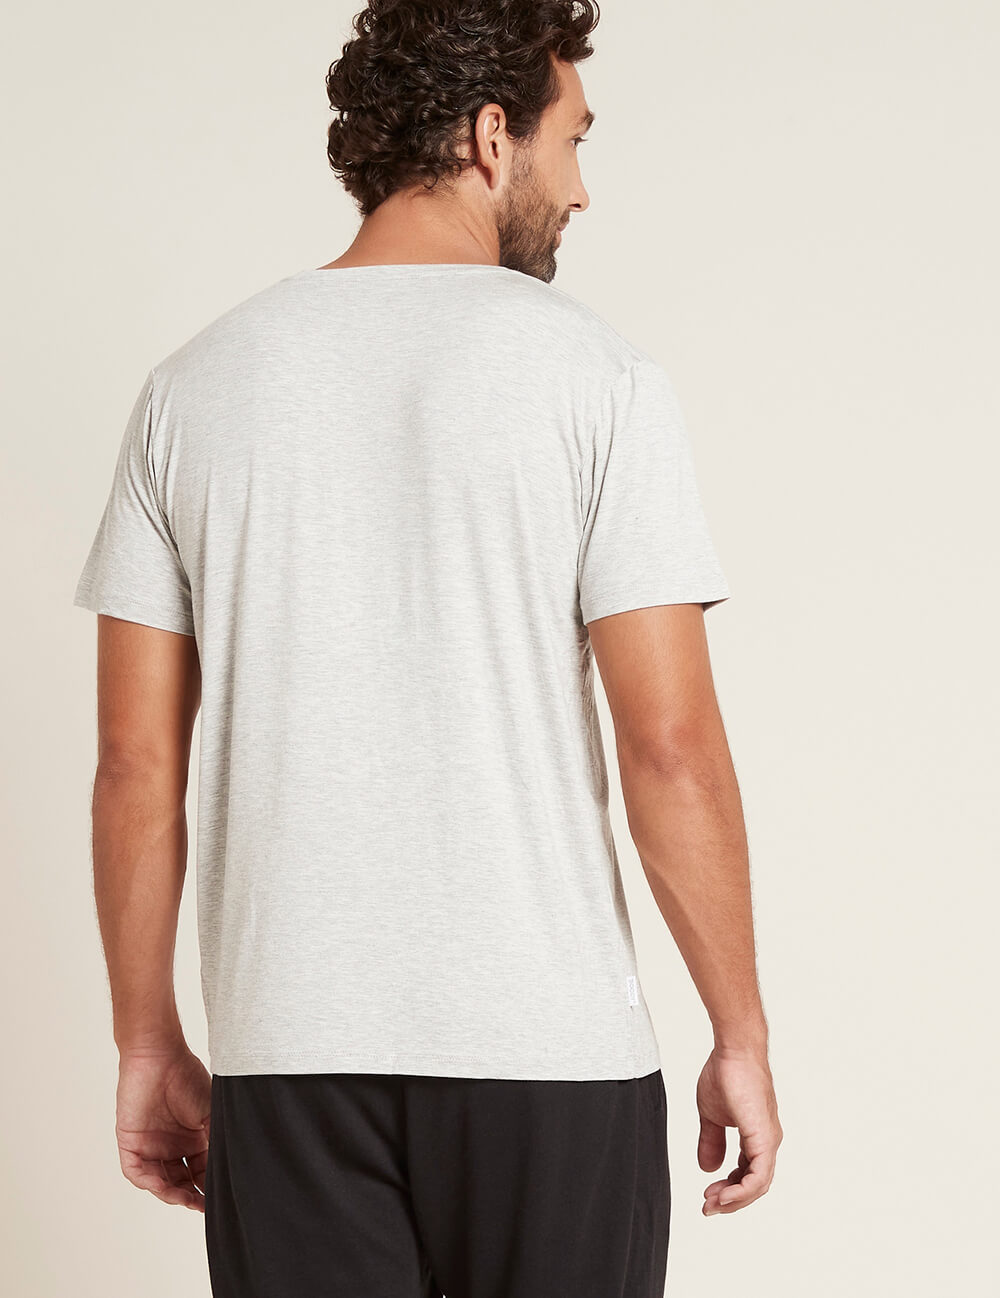 Boody Bamboo Mens Crew Neck Shirt in Light Grey Marl Back View